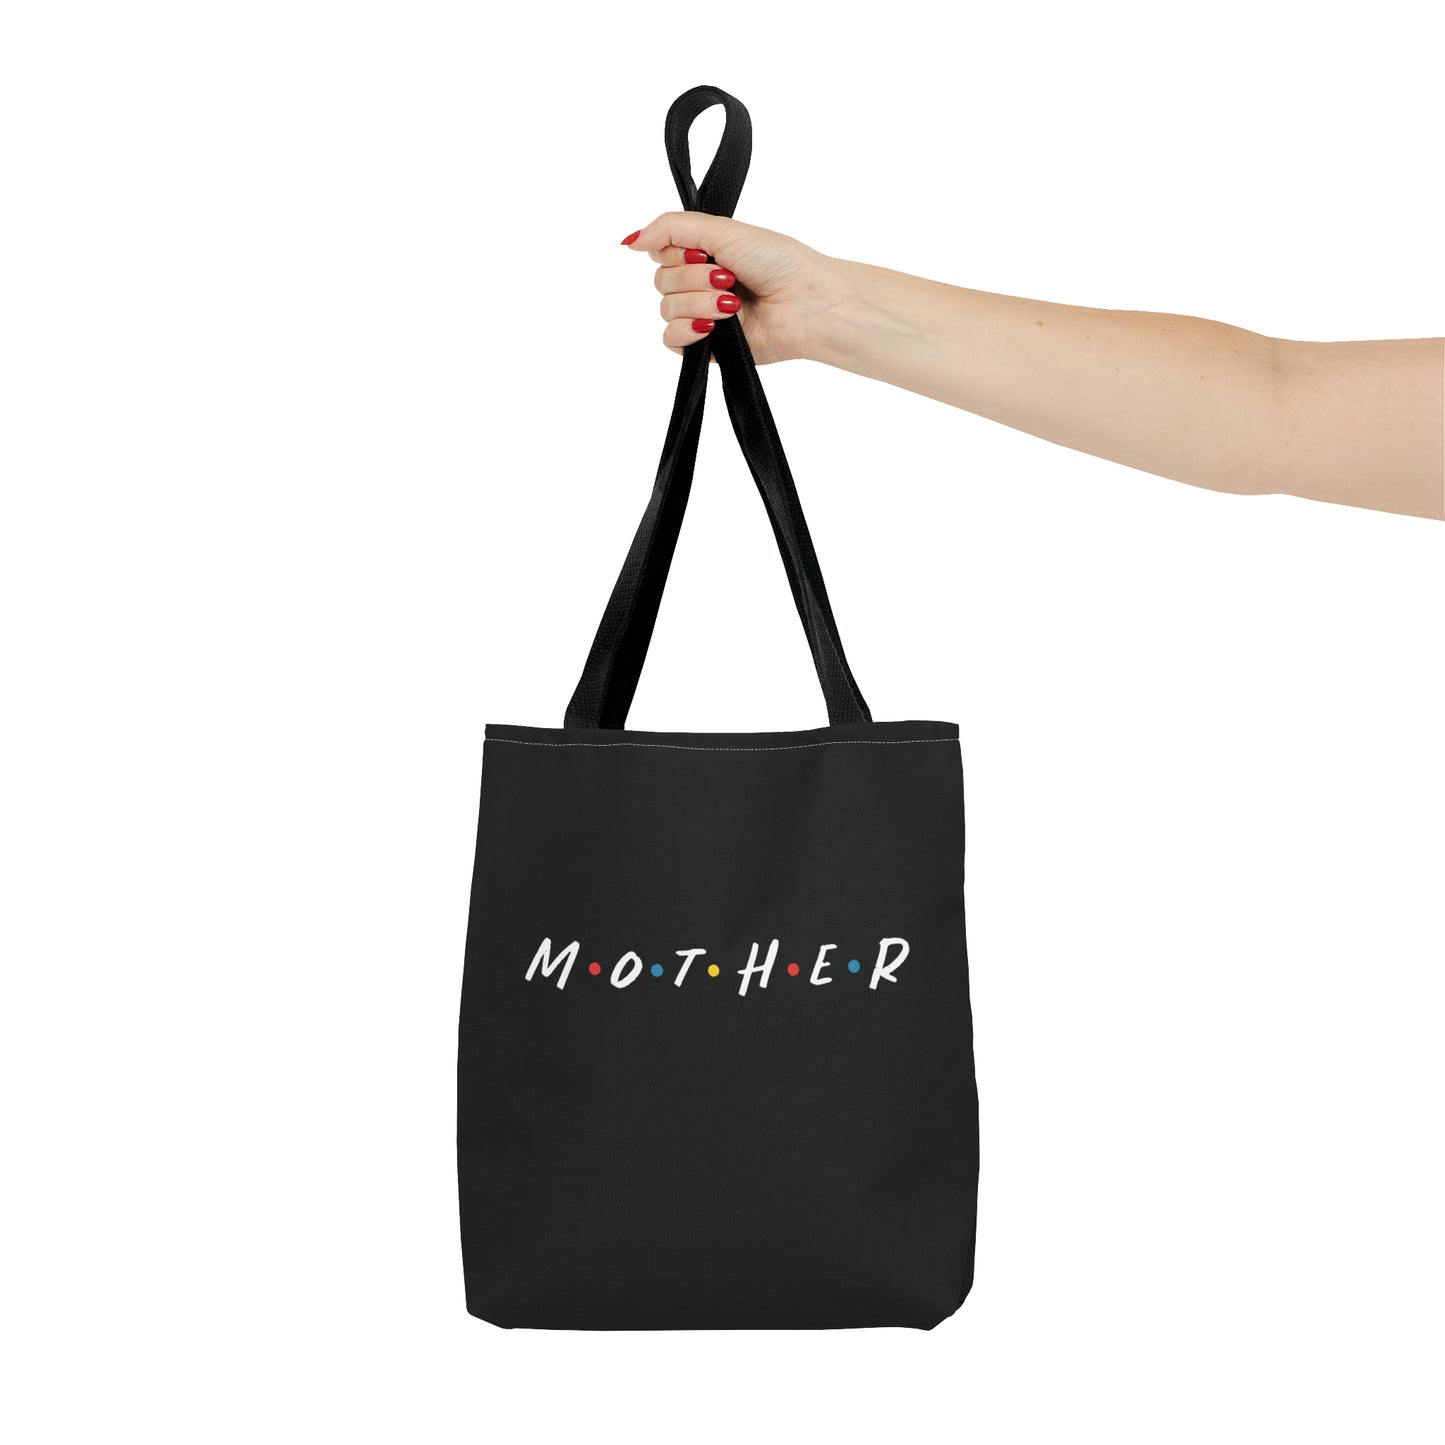 "Mother" - Mom Tote Bag